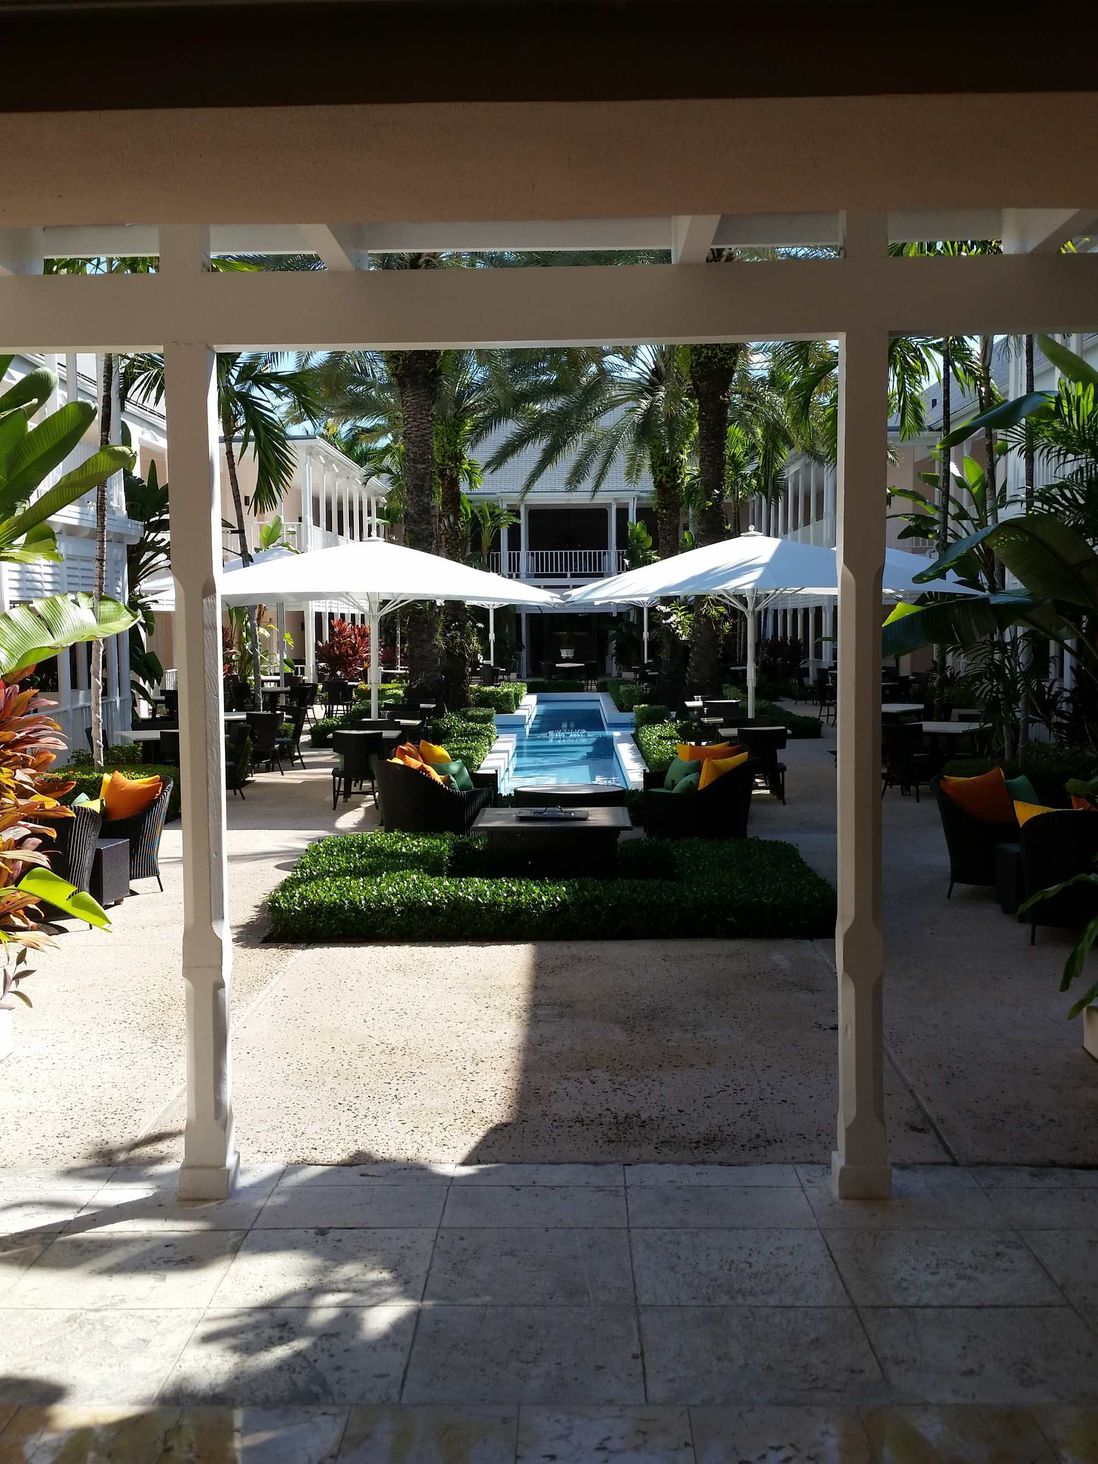 The main courtyard at The One&Only resort on Paradise Island.